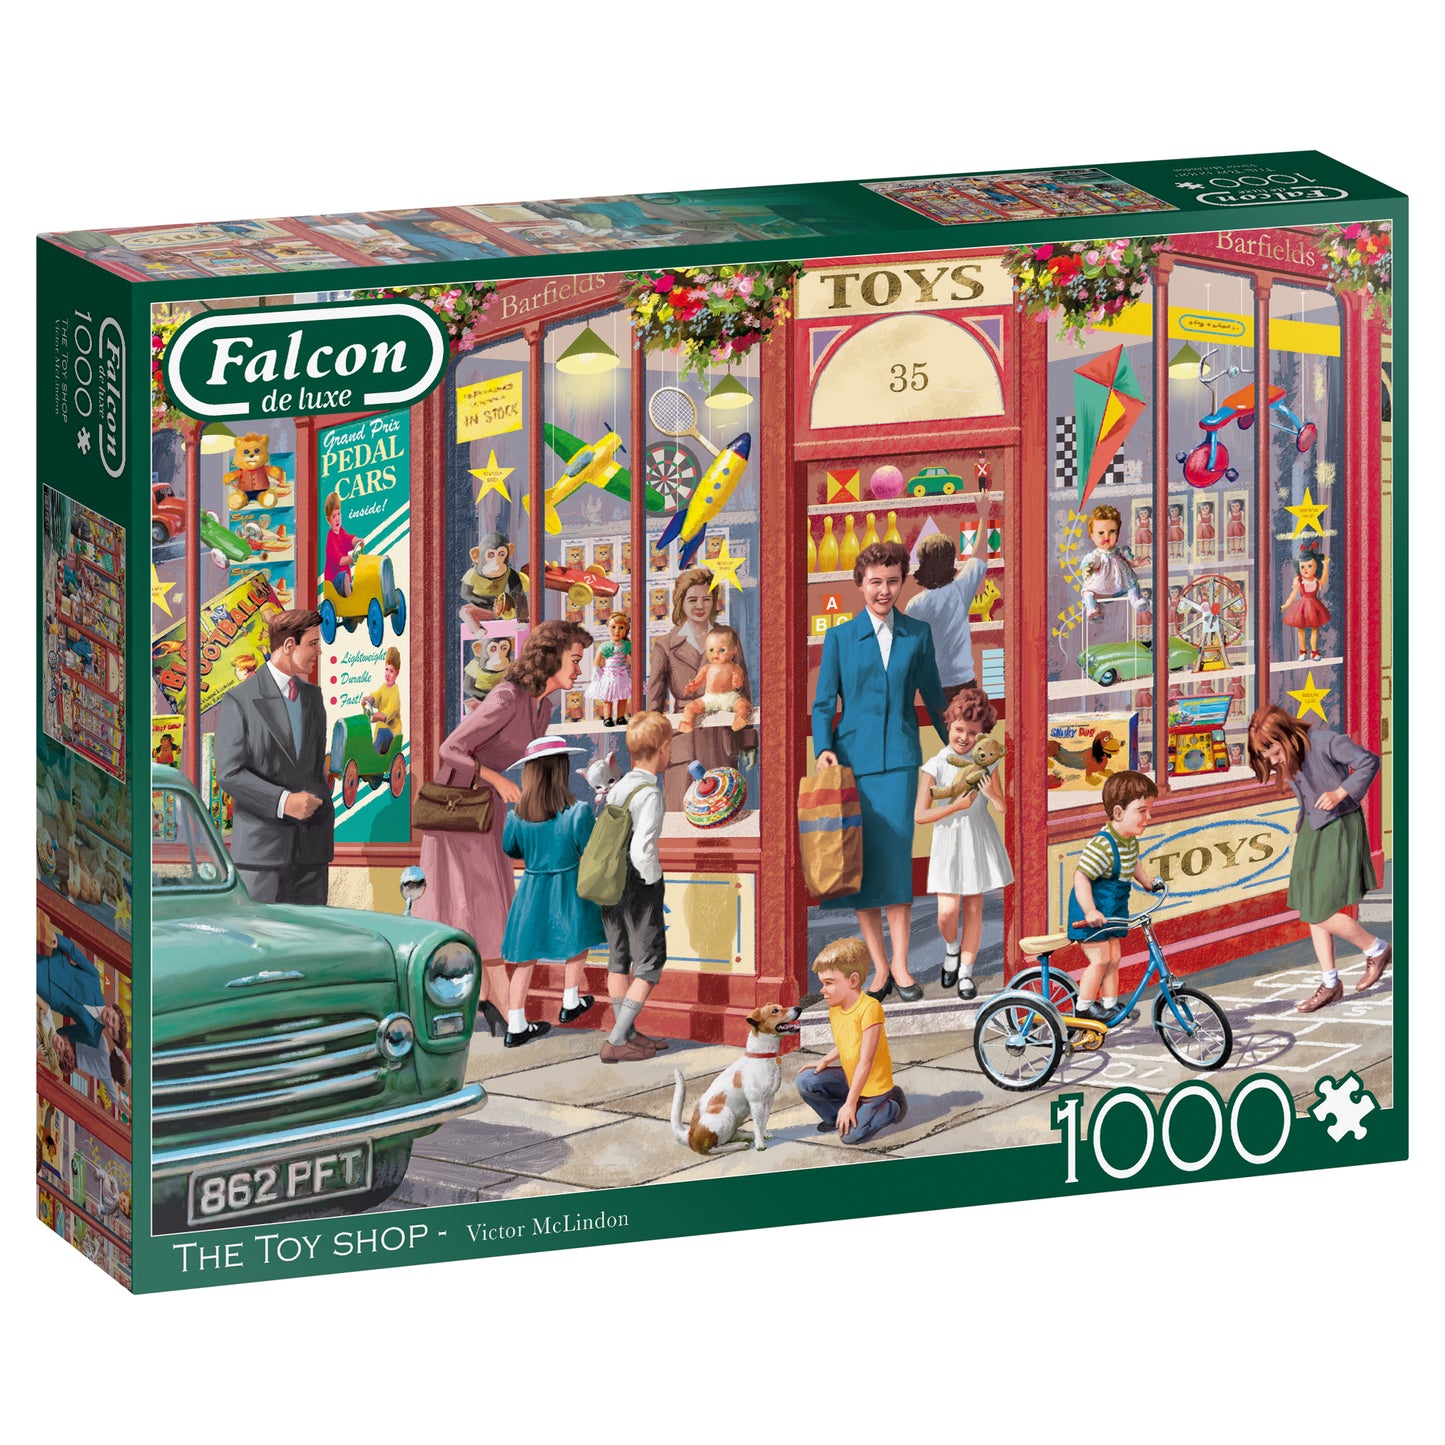 Falcon - The Toy Shop (1000 pieces) - product image - Jumboplay.com